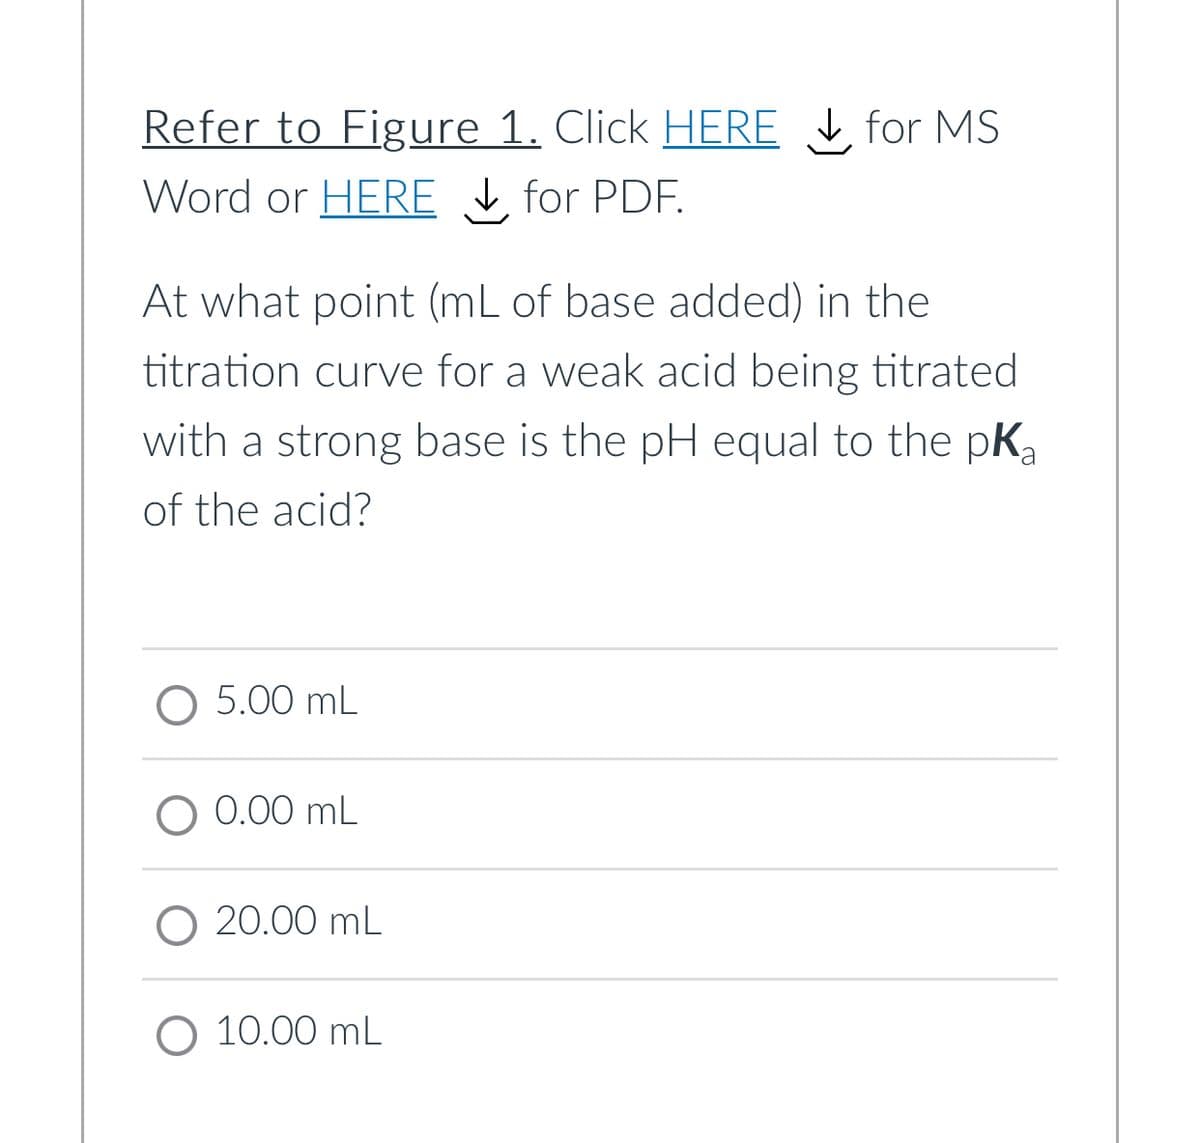 Refer to Figure 1. Click HERE for MS
Word or HERE for PDF.
At what point (mL of base added) in the
titration curve for a weak acid being titrated
with a strong base is the pH equal to the pKa
of the acid?
O 5.00 mL
O 0.00 mL
O 20.00 mL
O 10.00 mL